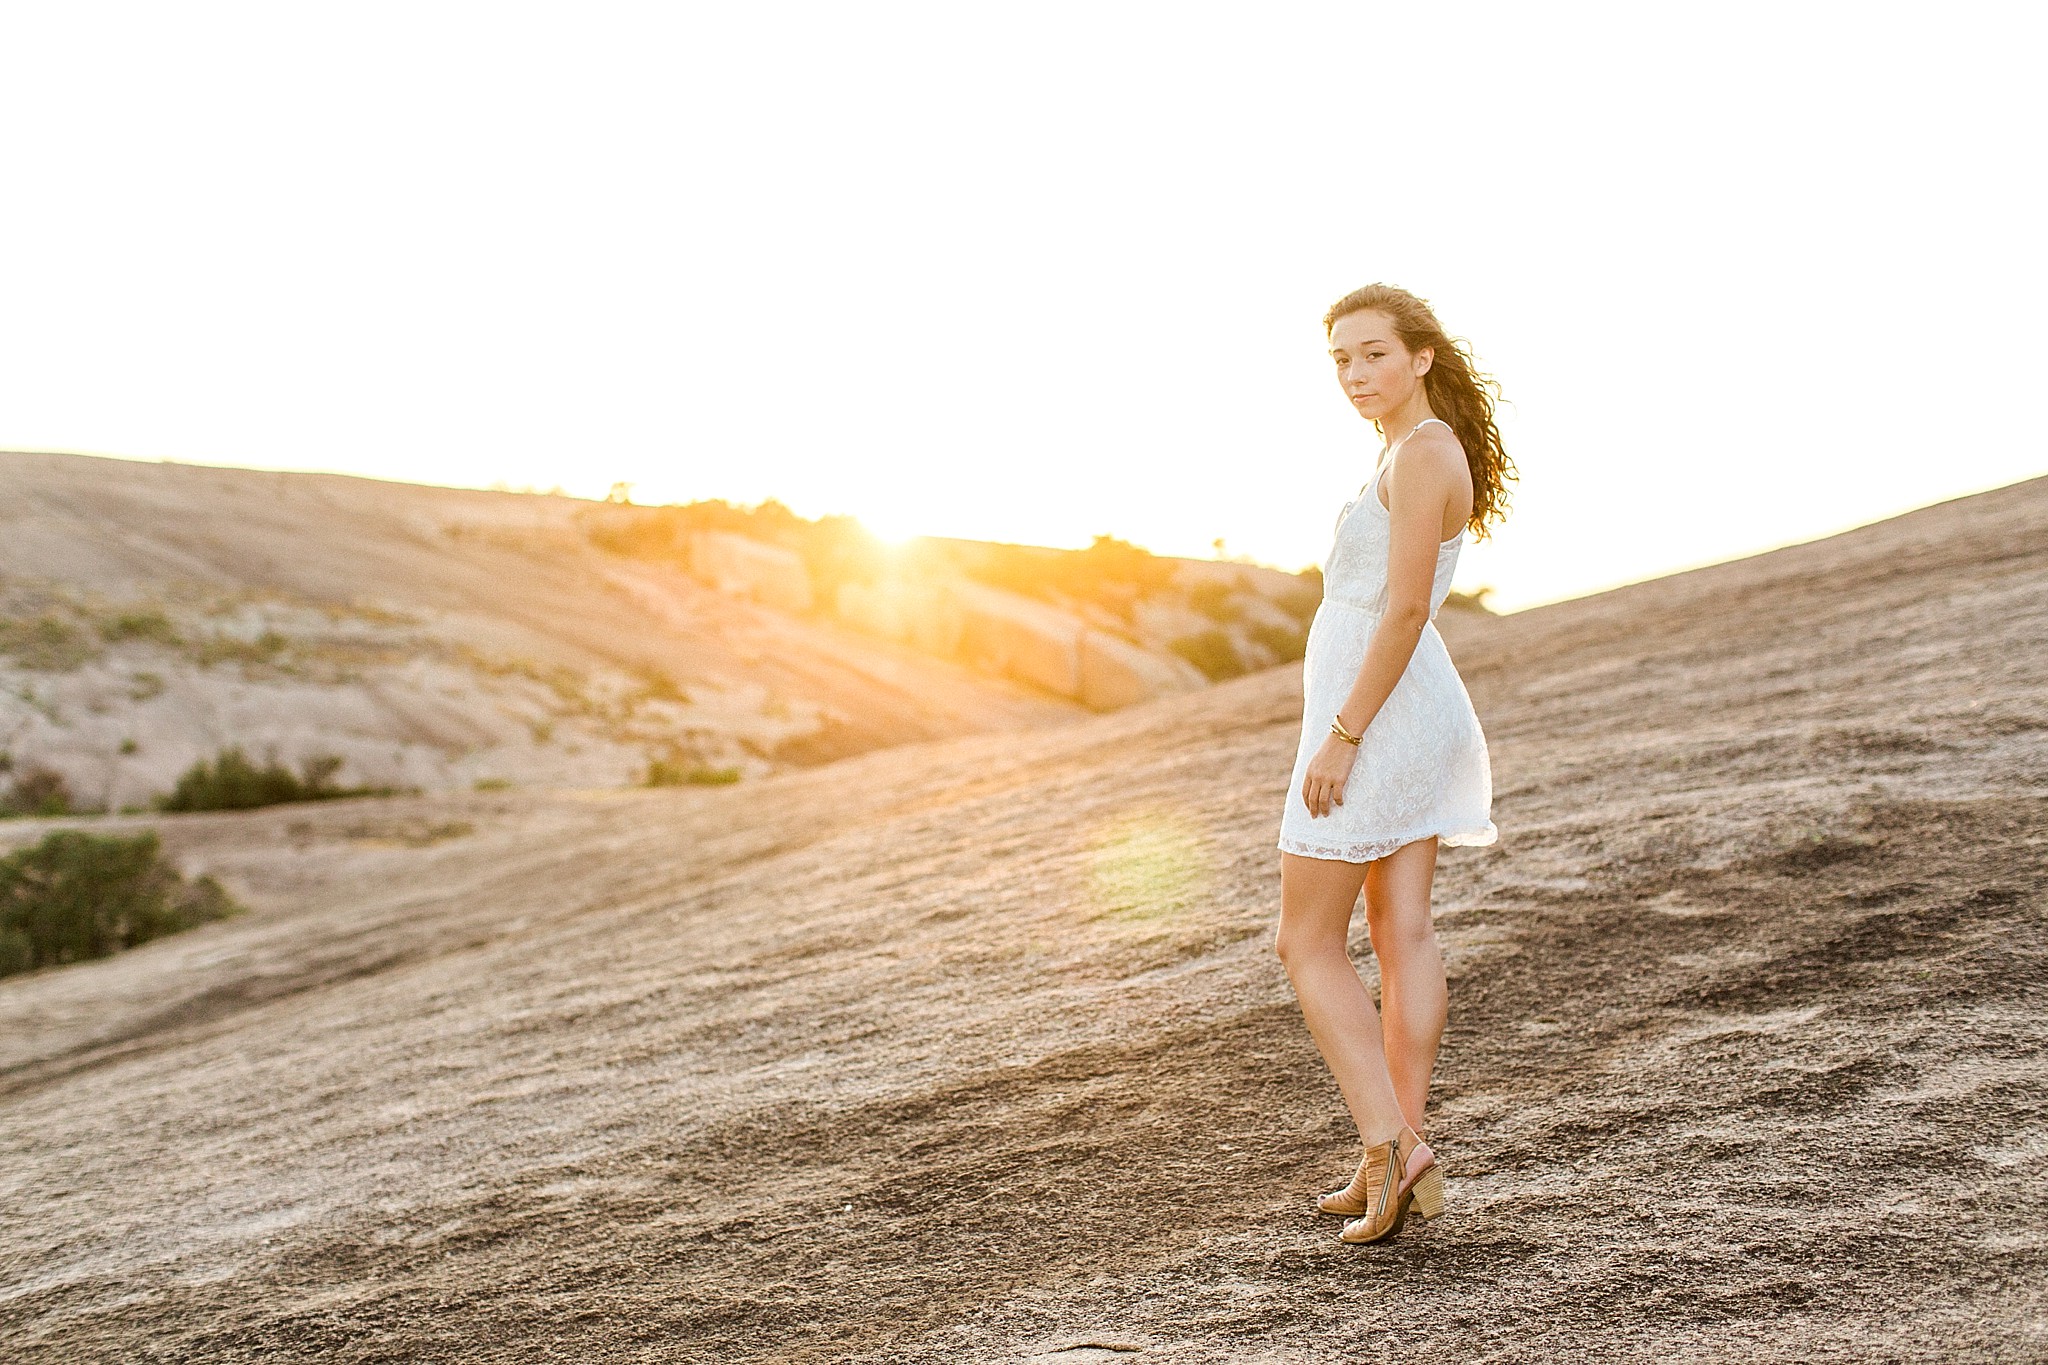 Destination Portrait and Senior Photography at The Enchanted Rock by Rachael Osborn © www.rachaelosborn.com - Chicago & Destination Wedding Photographer 